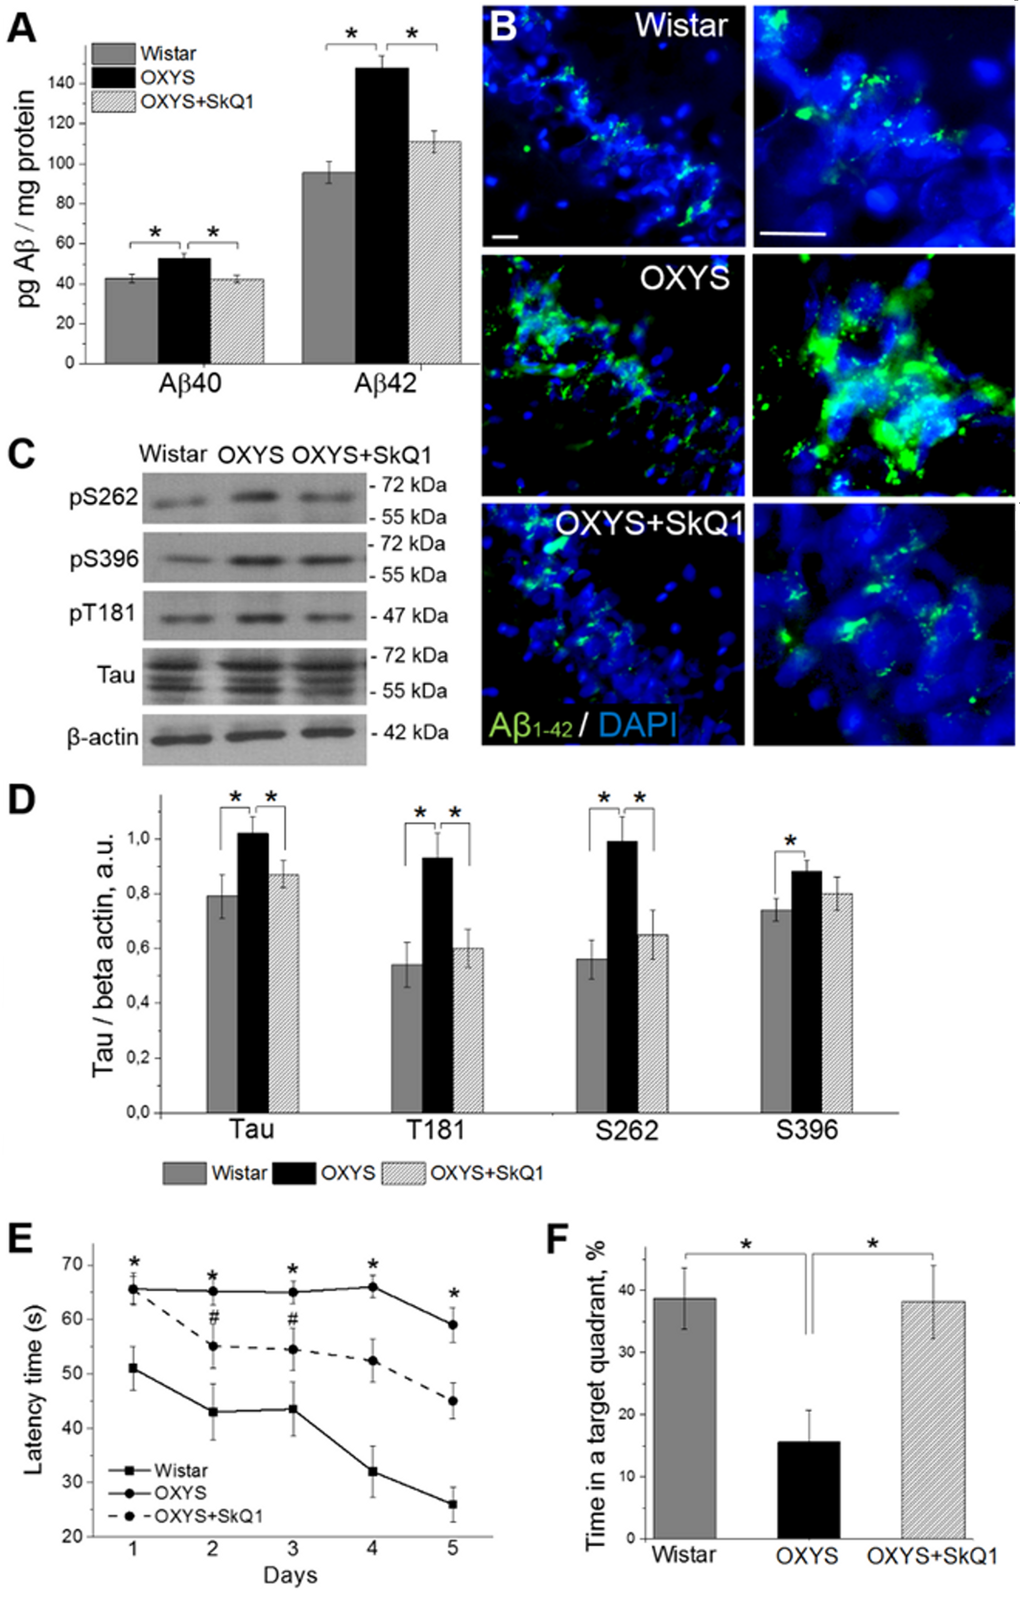 SkQ1 decreases amyloid-β levels and tau hyperphosphorylation and attenuates memory deficits. (A) The increased levels of amyloid-β1-40 and amyloid-β1-42 in the hippocampus of untreated OXYS rats (n=8; pB) Immunostaining for amyloid-β1-42 (Aβ1-42 in green) in the hippocampus of Wistar rats, untreated OXYS rats, and SkQ1-treated OXYS rats. The DAPI (blue) staining shows cell nuclei. (C and D) The increased levels of Tau, pТ181, pS262, and pS396 in the hippocampus of untreated OXYS rats (n=6; pE) Compared to Wistar rats, OXYS rats (n=8) showed increased escape latencies on all trial days (pF) spent less time in the target quadrant on the sixth day (p#p